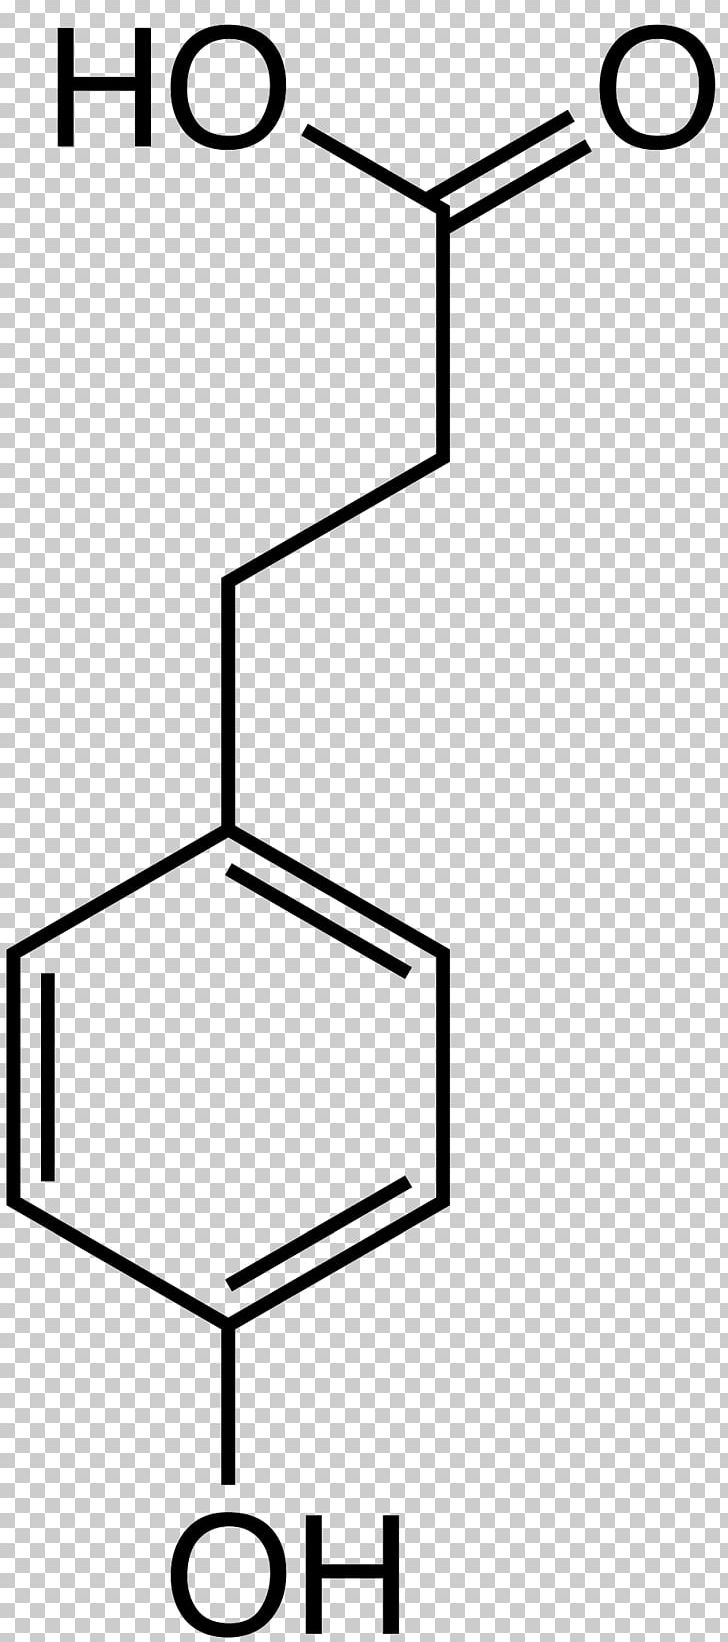 Coniferyl Alcohol Molecule Ferulic Acid 4-Hydroxybenzoic Acid PNG, Clipart, 4hydroxybenzoic Acid, Alcohol, Angle, Area, Black And White Free PNG Download